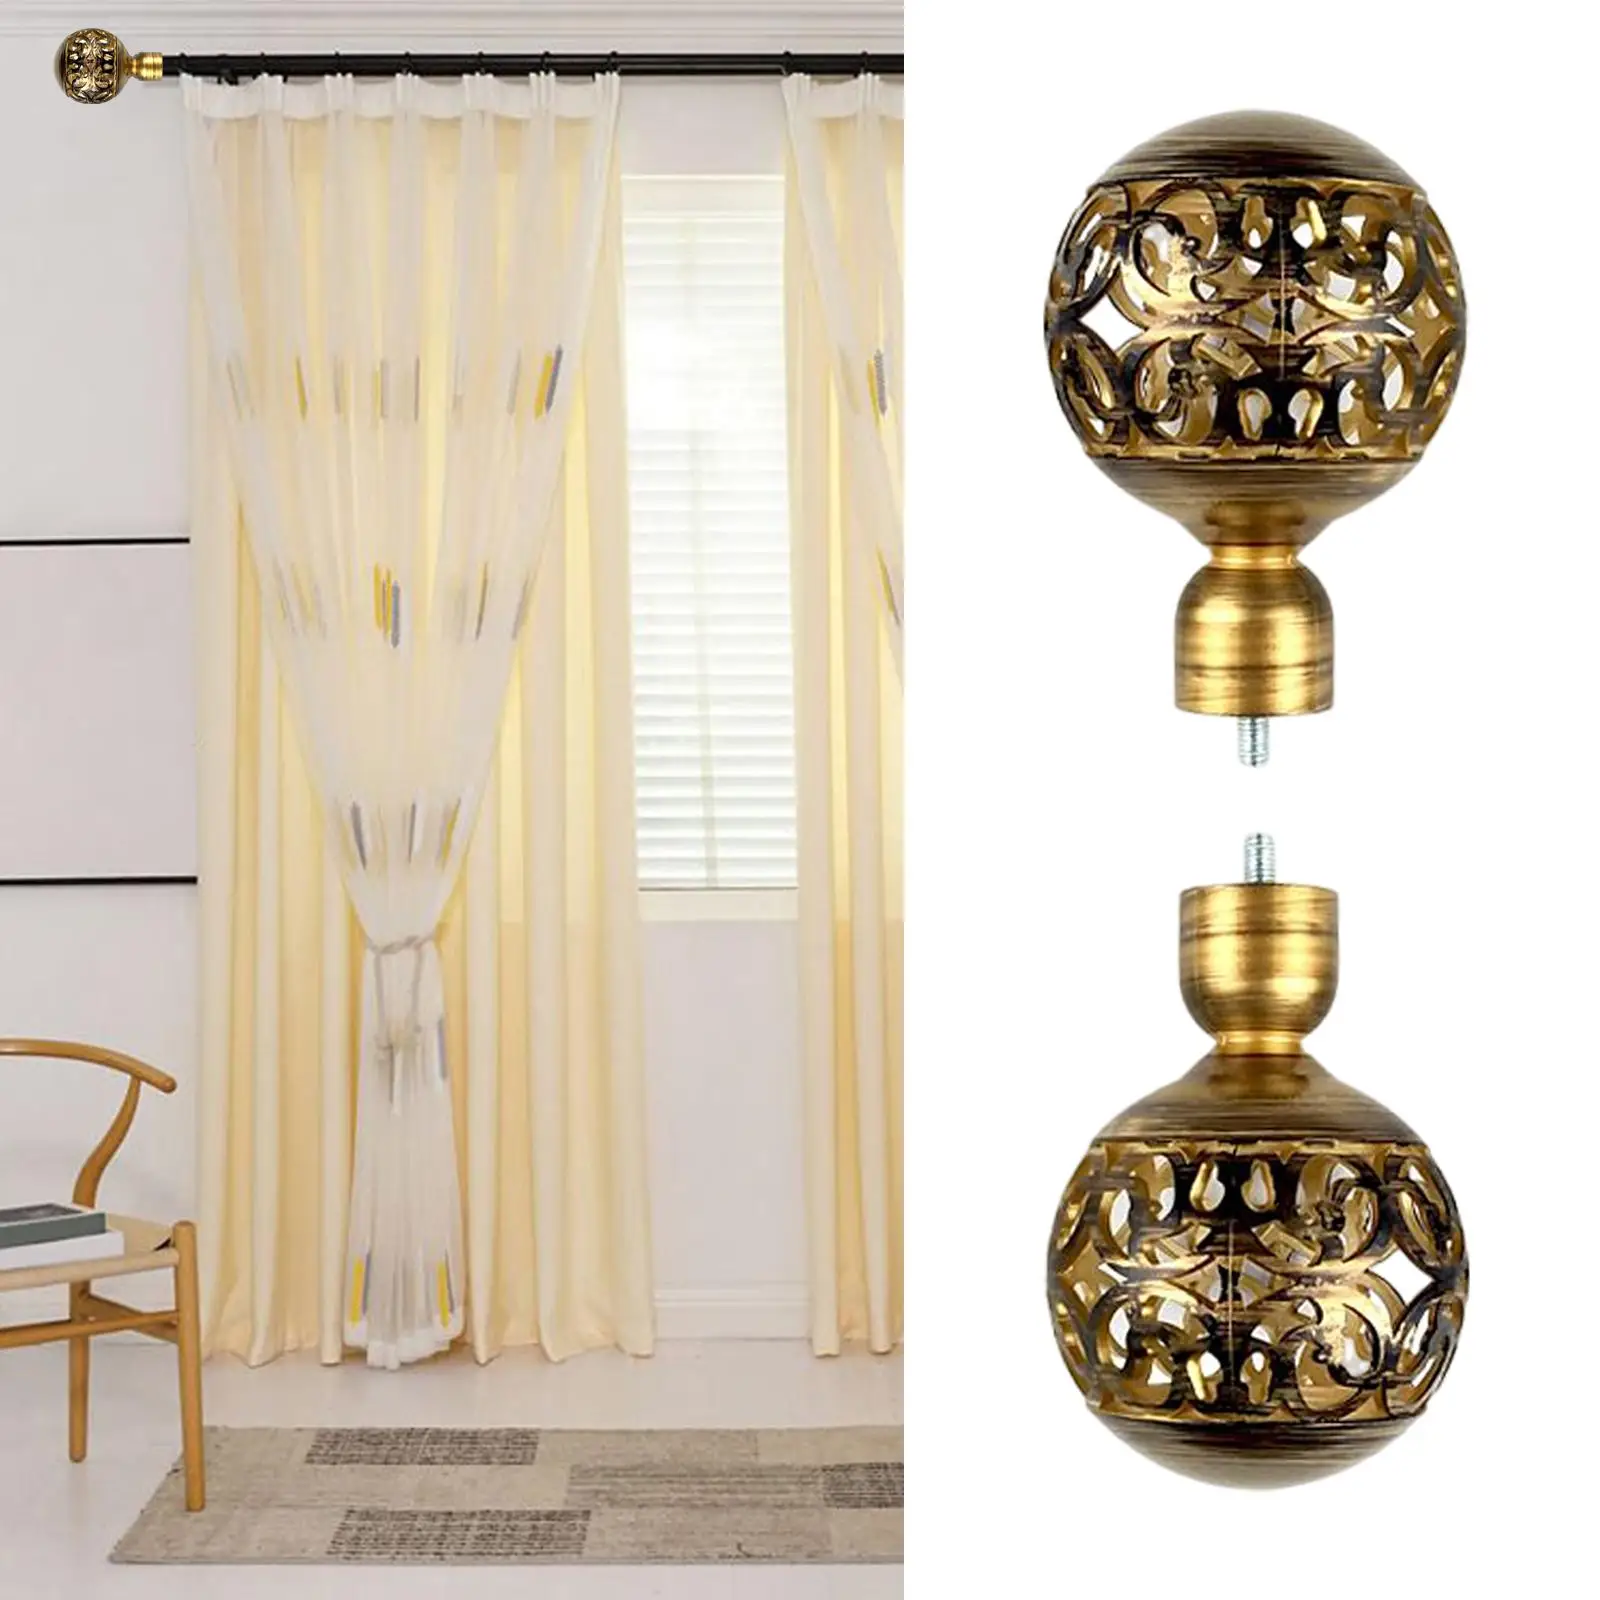 2x Window Curtain Rod Finial Ends 3/4 inch Diameter Vintage Decorative Drapery Rod Finials for Home Bathroom Living Room